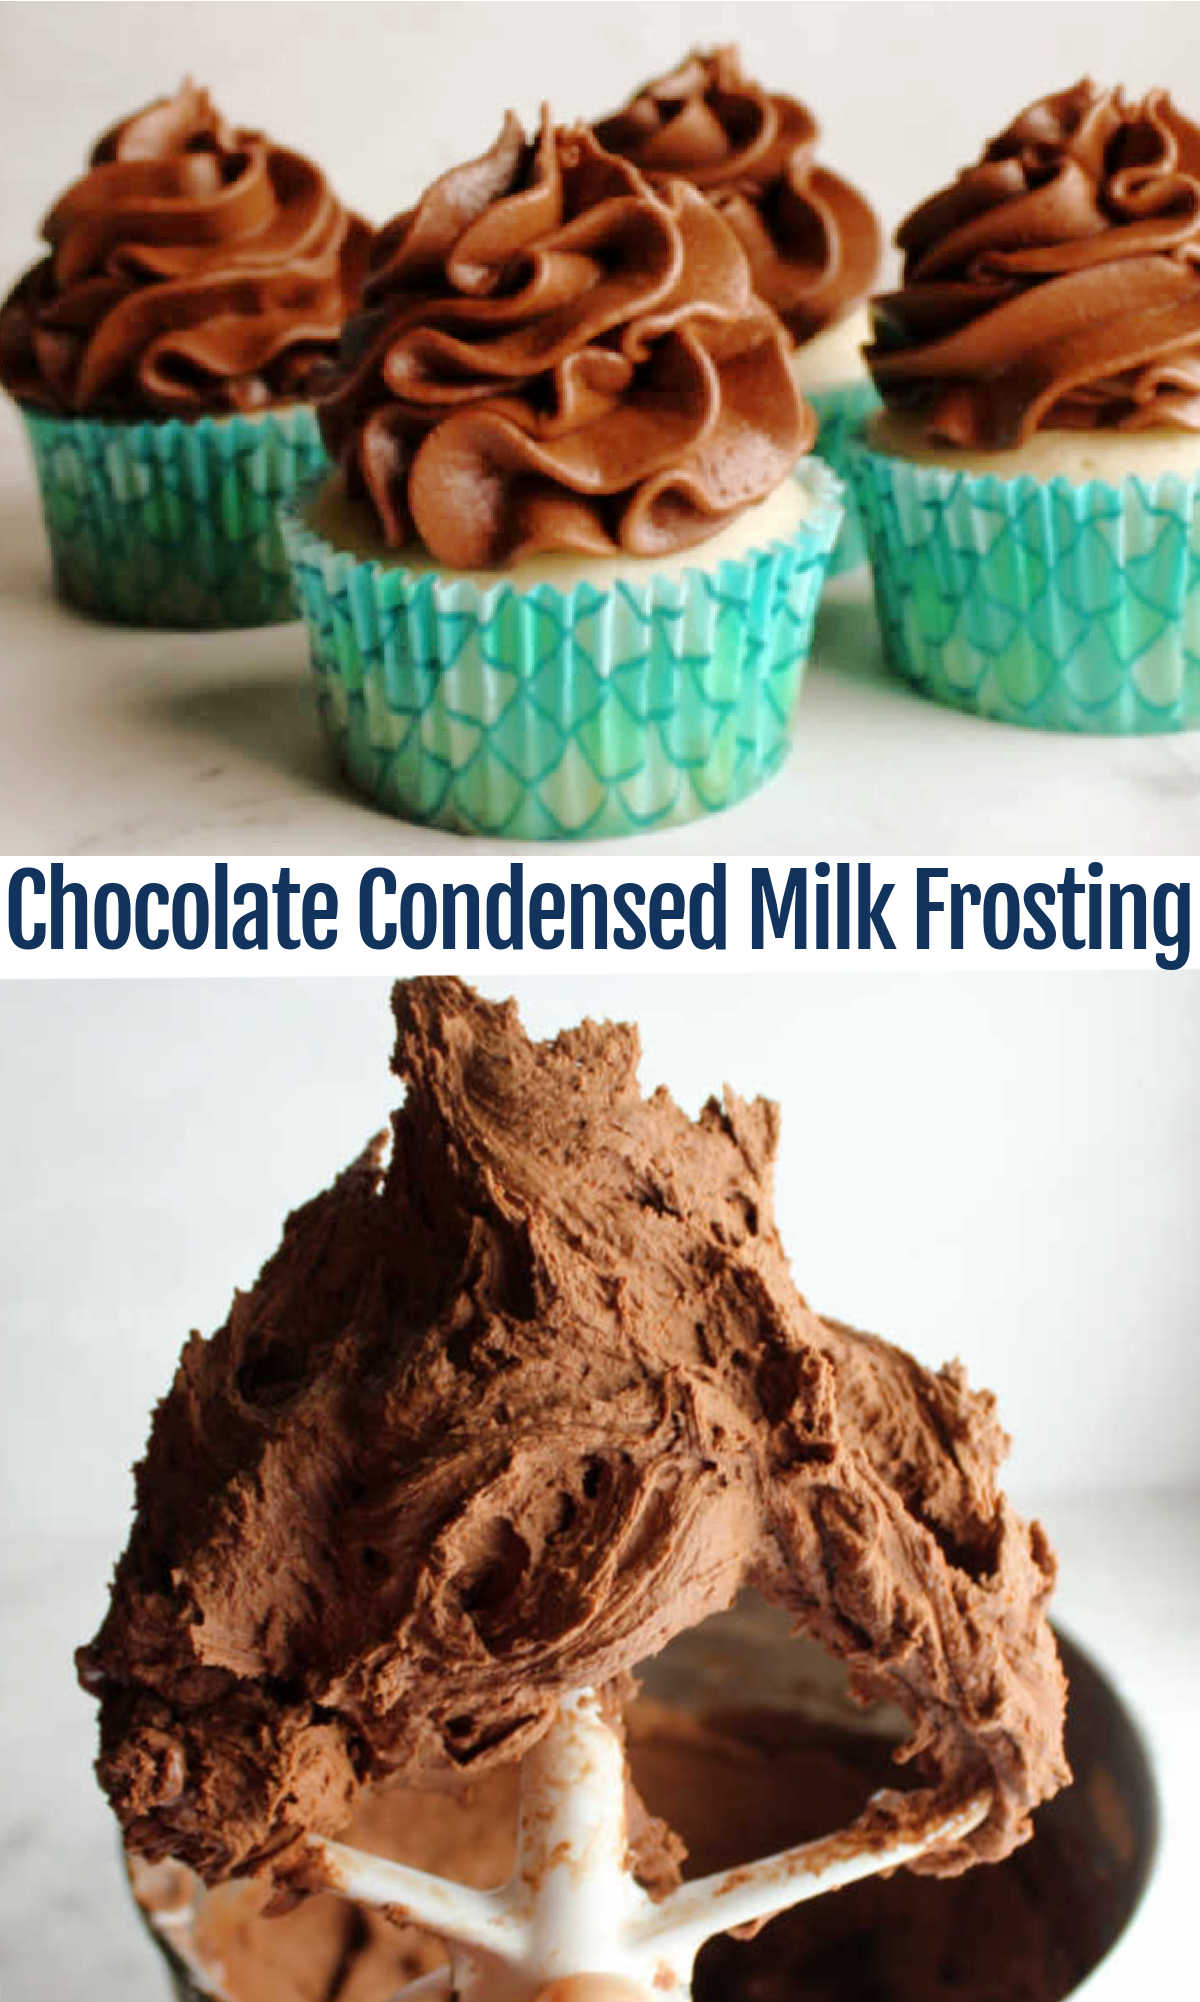 How do you make chocolate frosting even better? Add sweetened condensed milk!